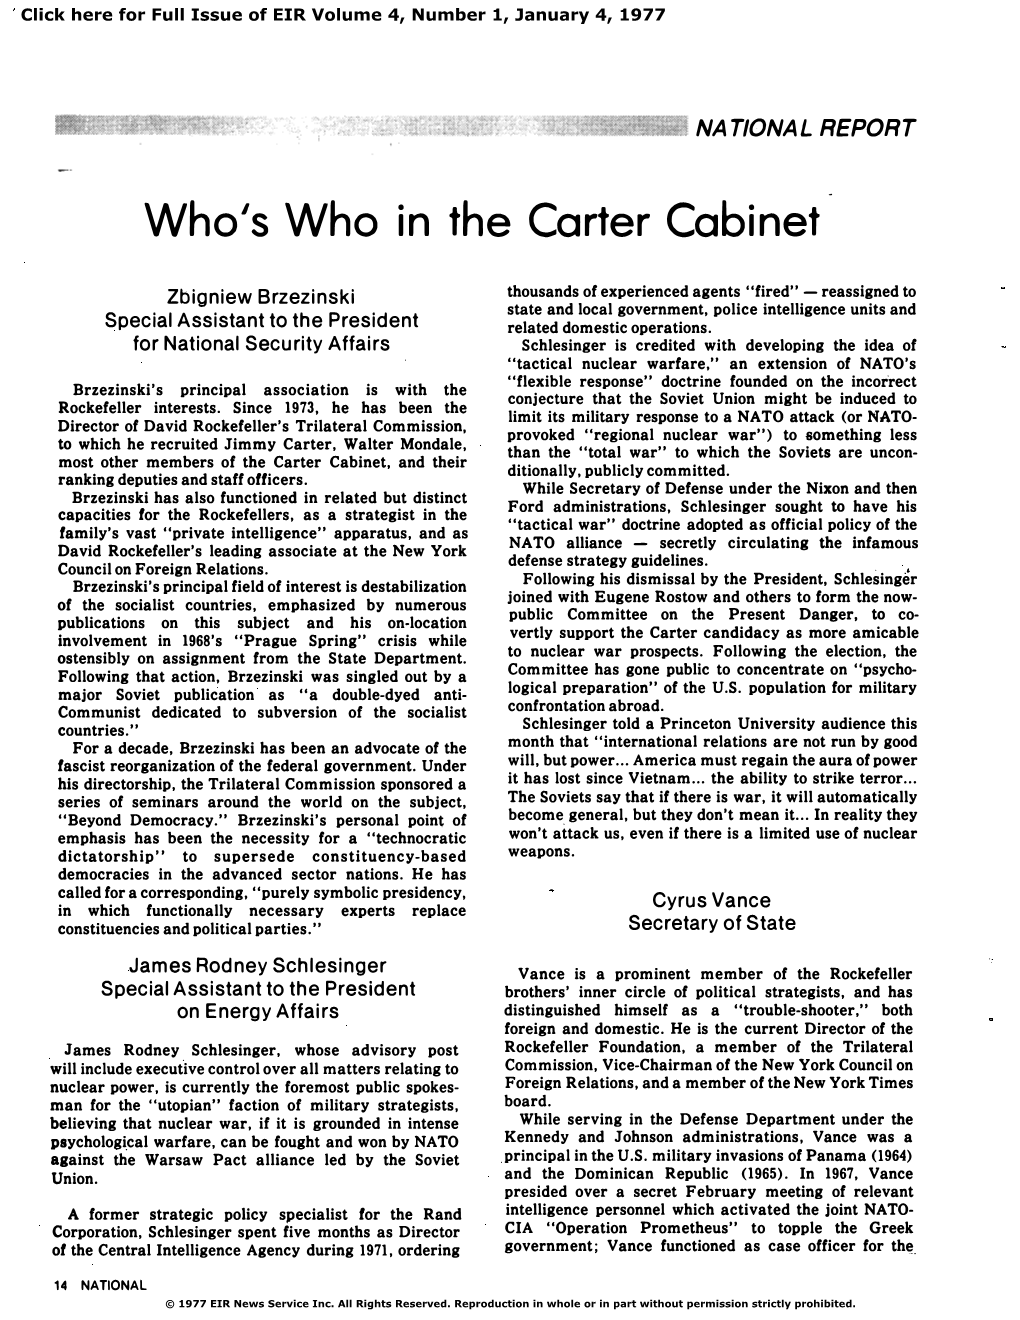 Who's Who in the Carter Cabinet